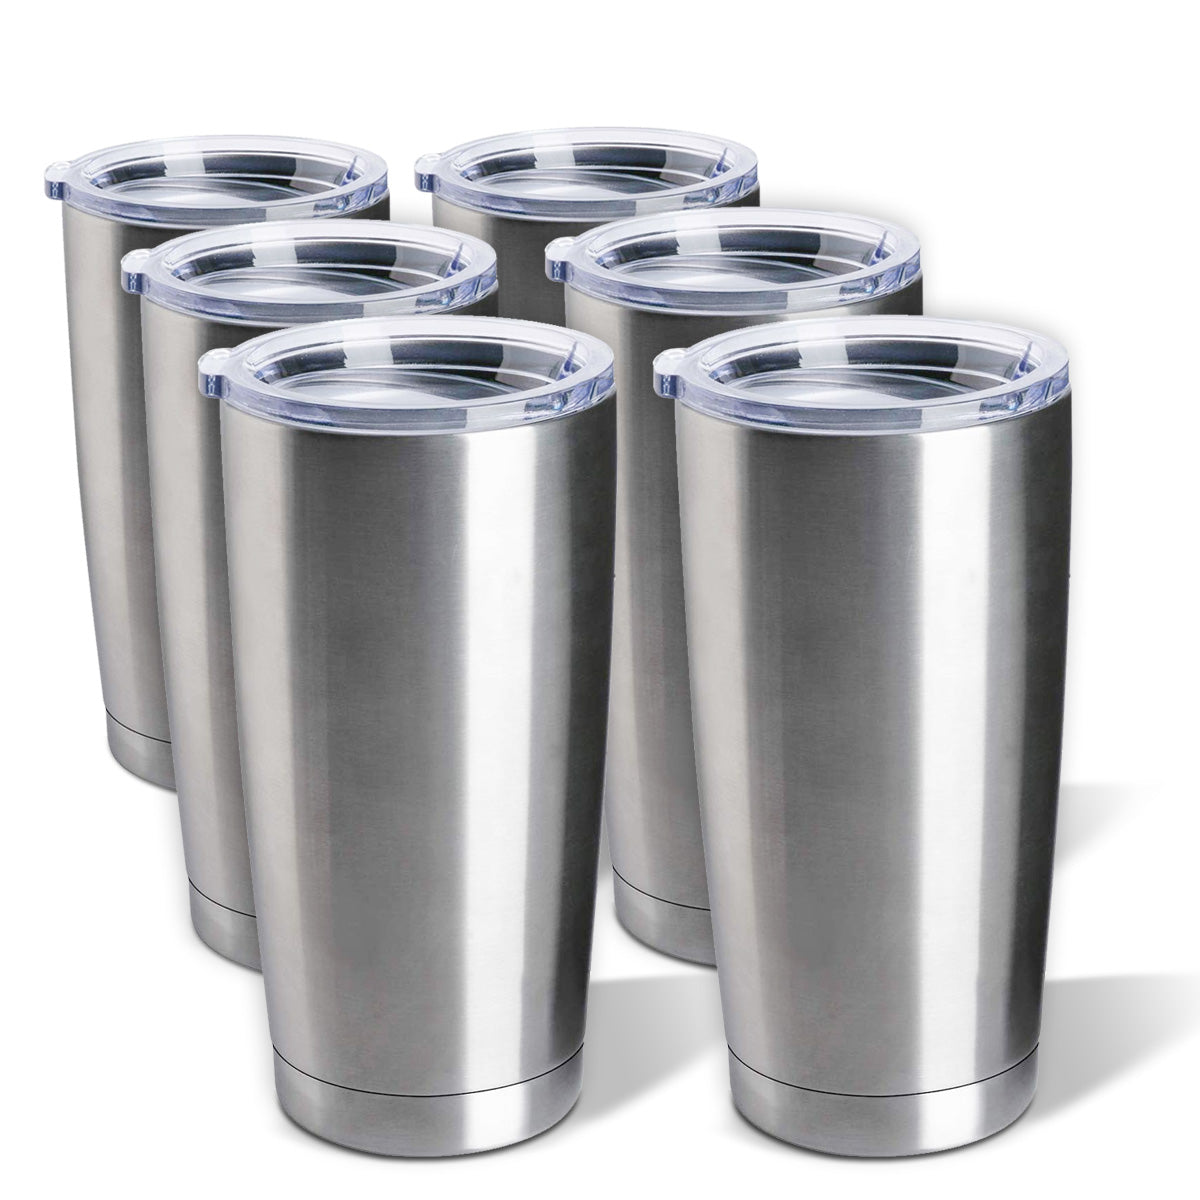 Stainless Steel Tumblers Bulk 25-Pack 20oz Double Wall Vacuum Insulated by Pixi